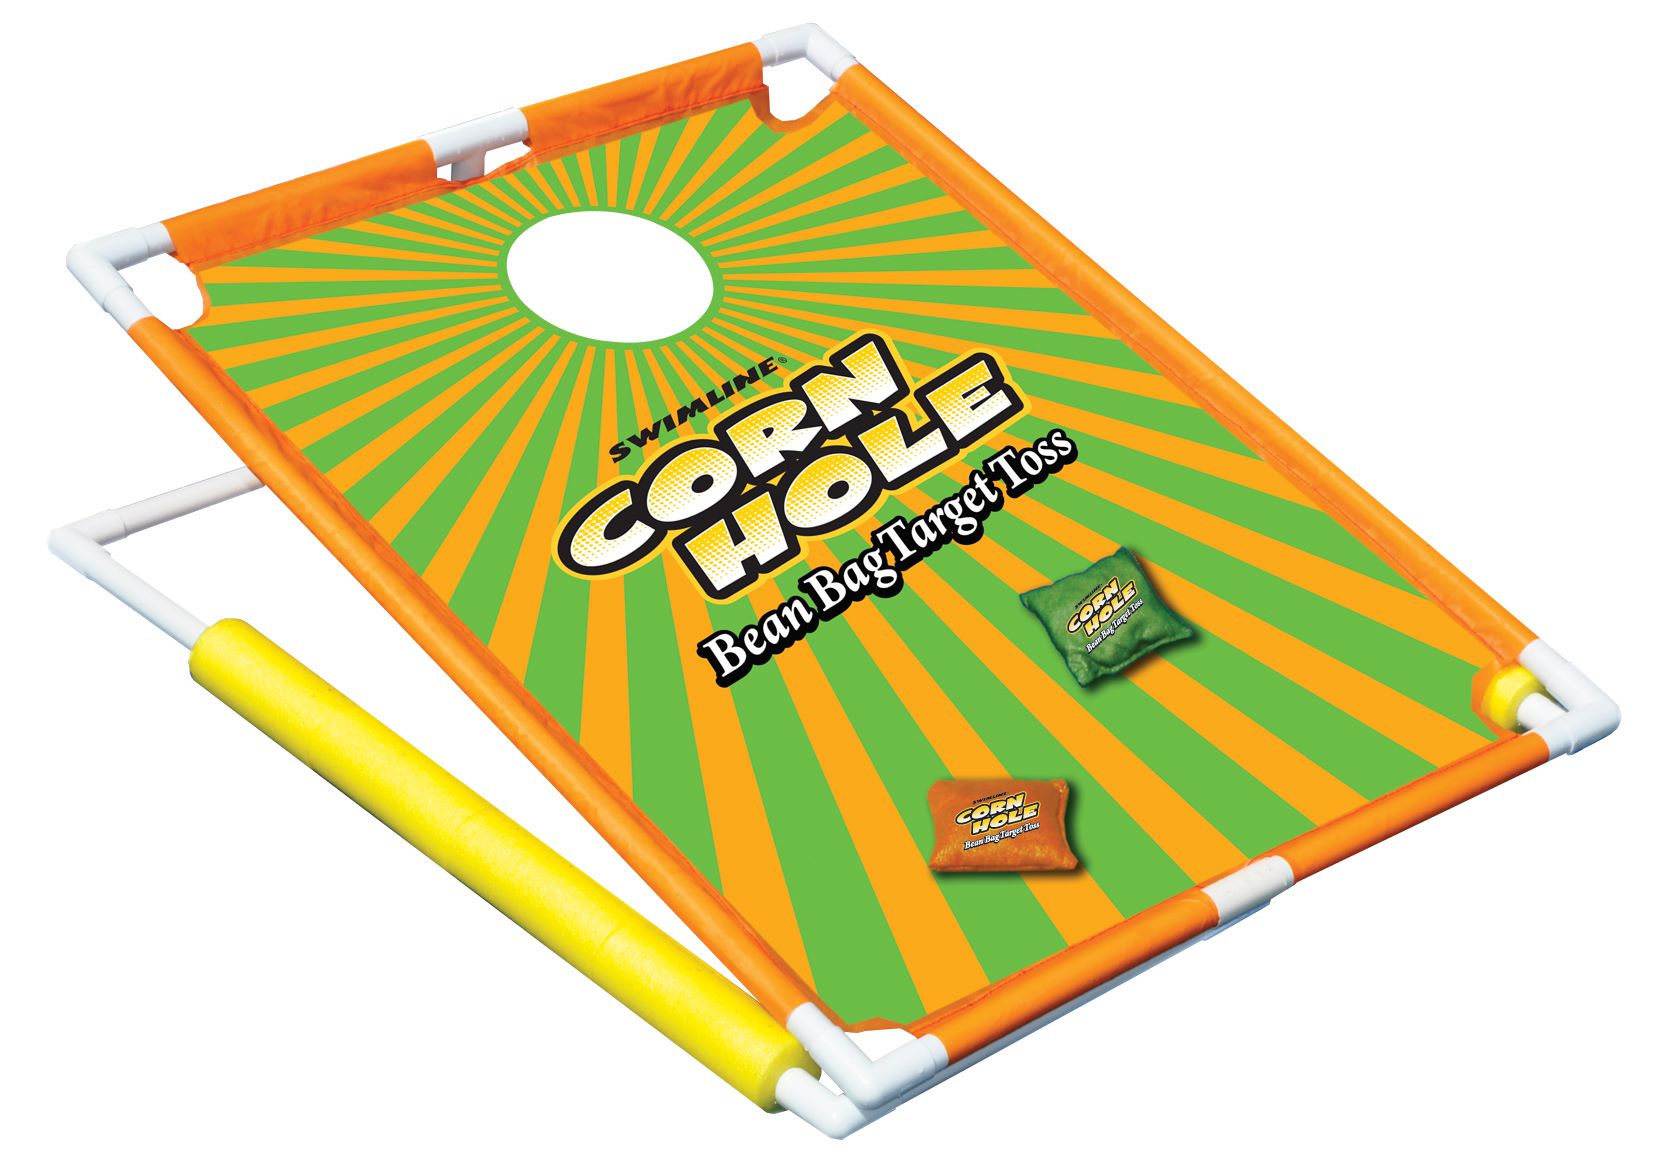 91690 Cornhole Game - CLEARANCE SAFETY COVERS